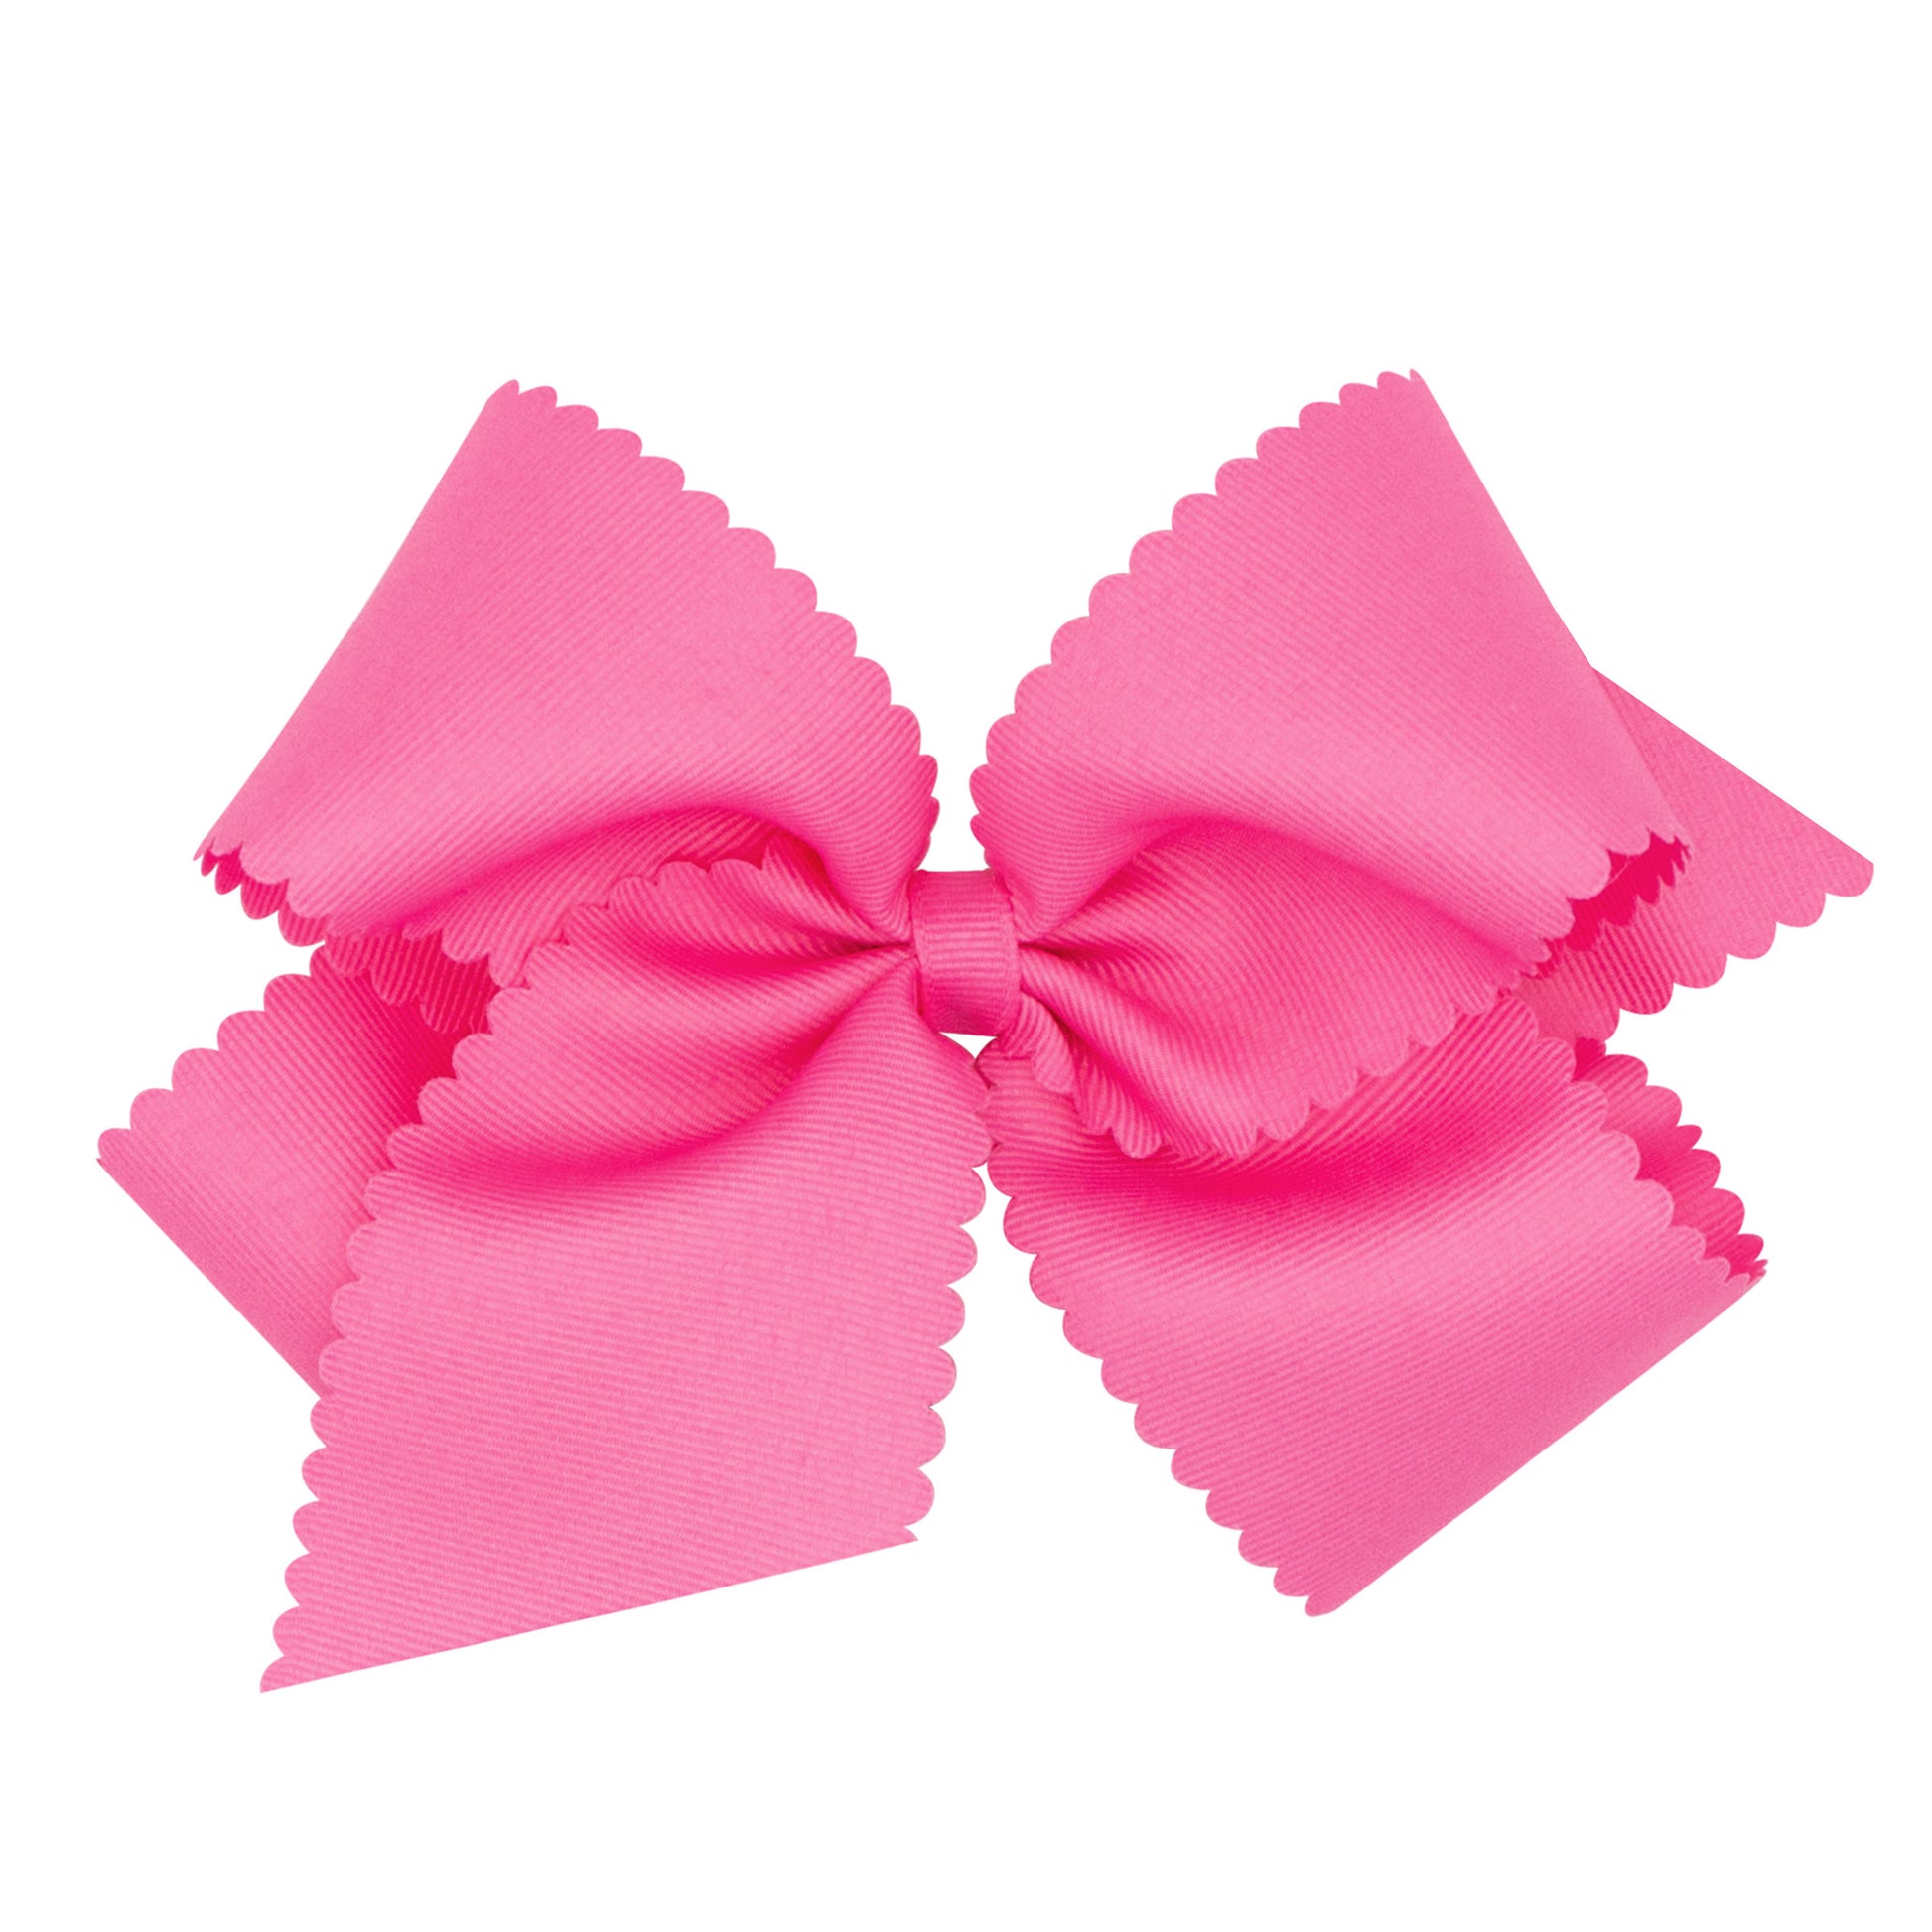 King Scalloped Edge Grosgrain Bow - Hot Pink Kids Hair Accessories Wee Ones   